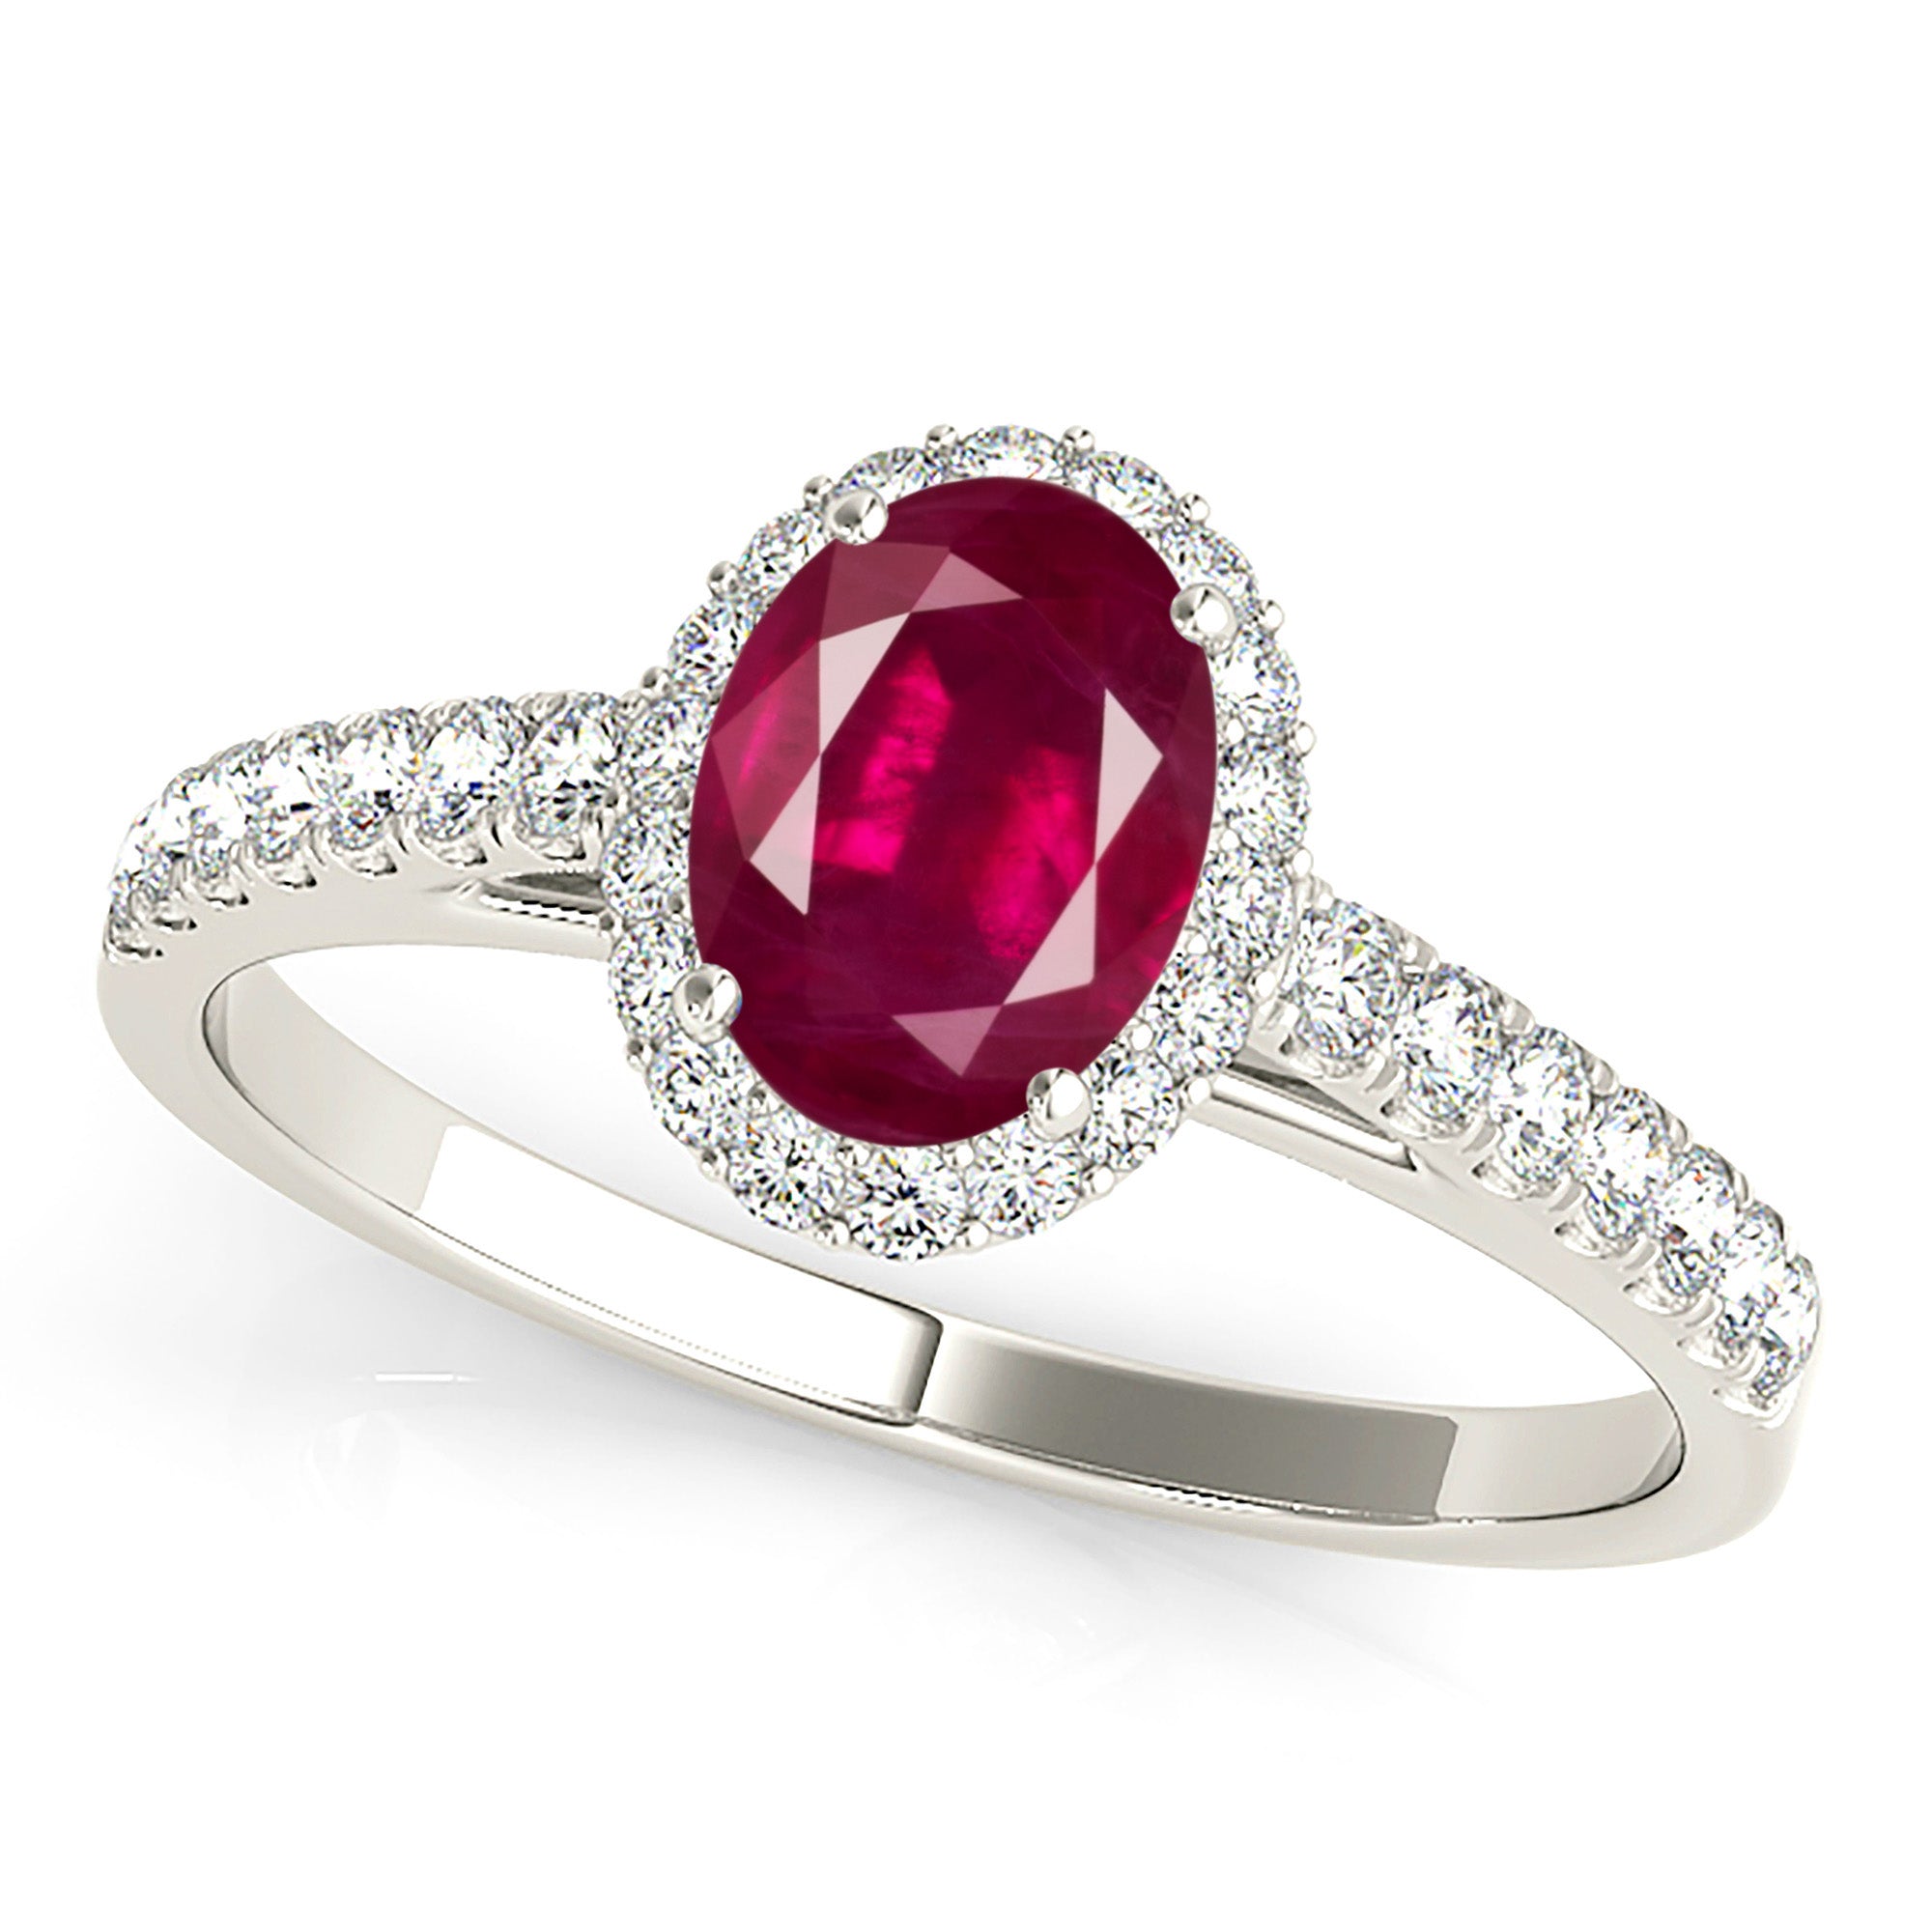 1.55 ct. Genuine Oval Ruby Ring With 0.25 ctw. Diamond Halo And Delicate Diamond Band-in 14K/18K White, Yellow, Rose Gold and Platinum - Christmas Jewelry Gift -VIRABYANI